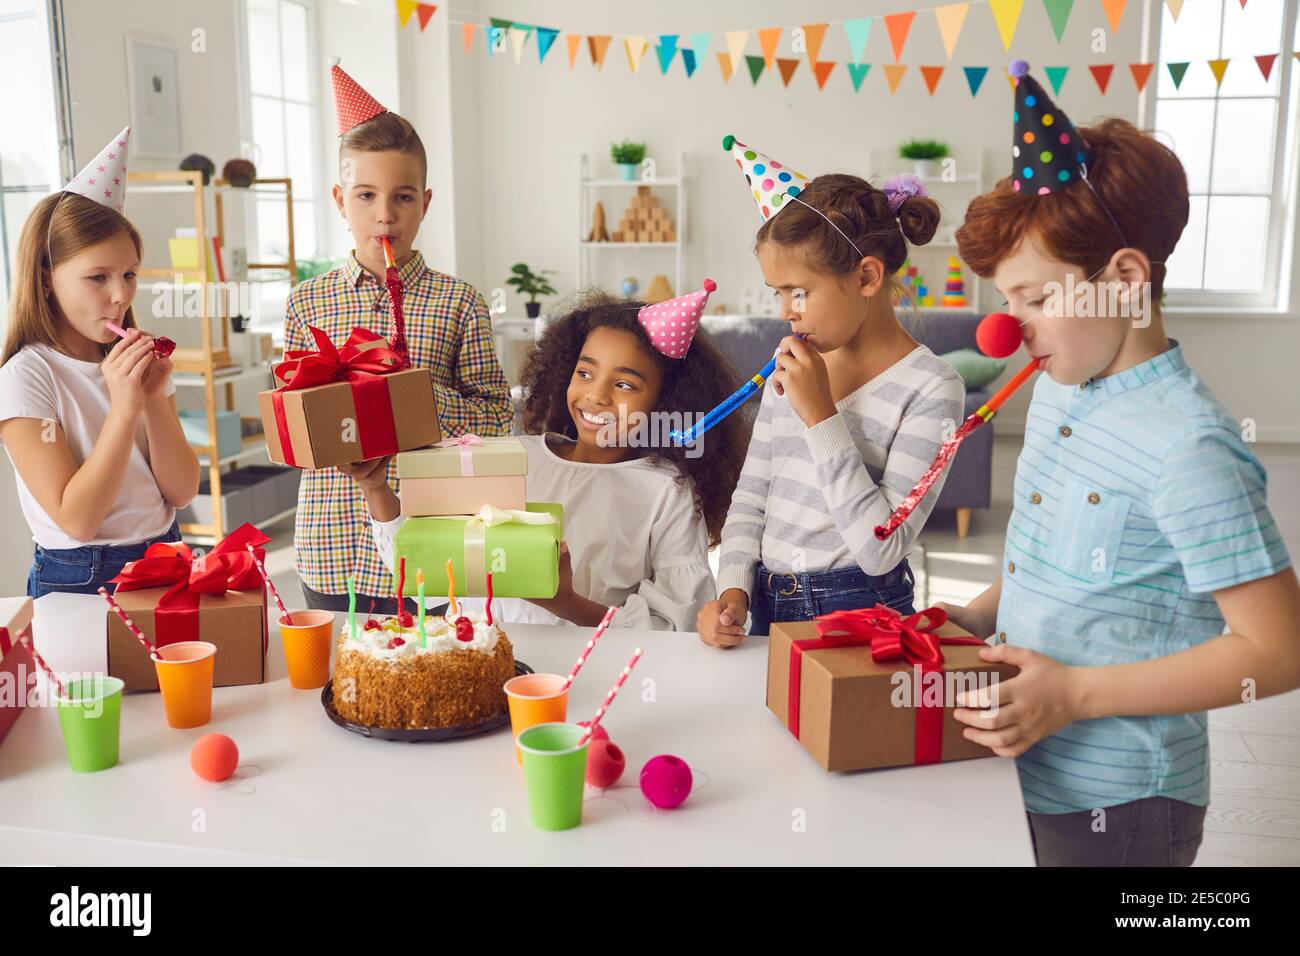 Birthday whistle isolated Stock Photo by ©5seconds 127454568